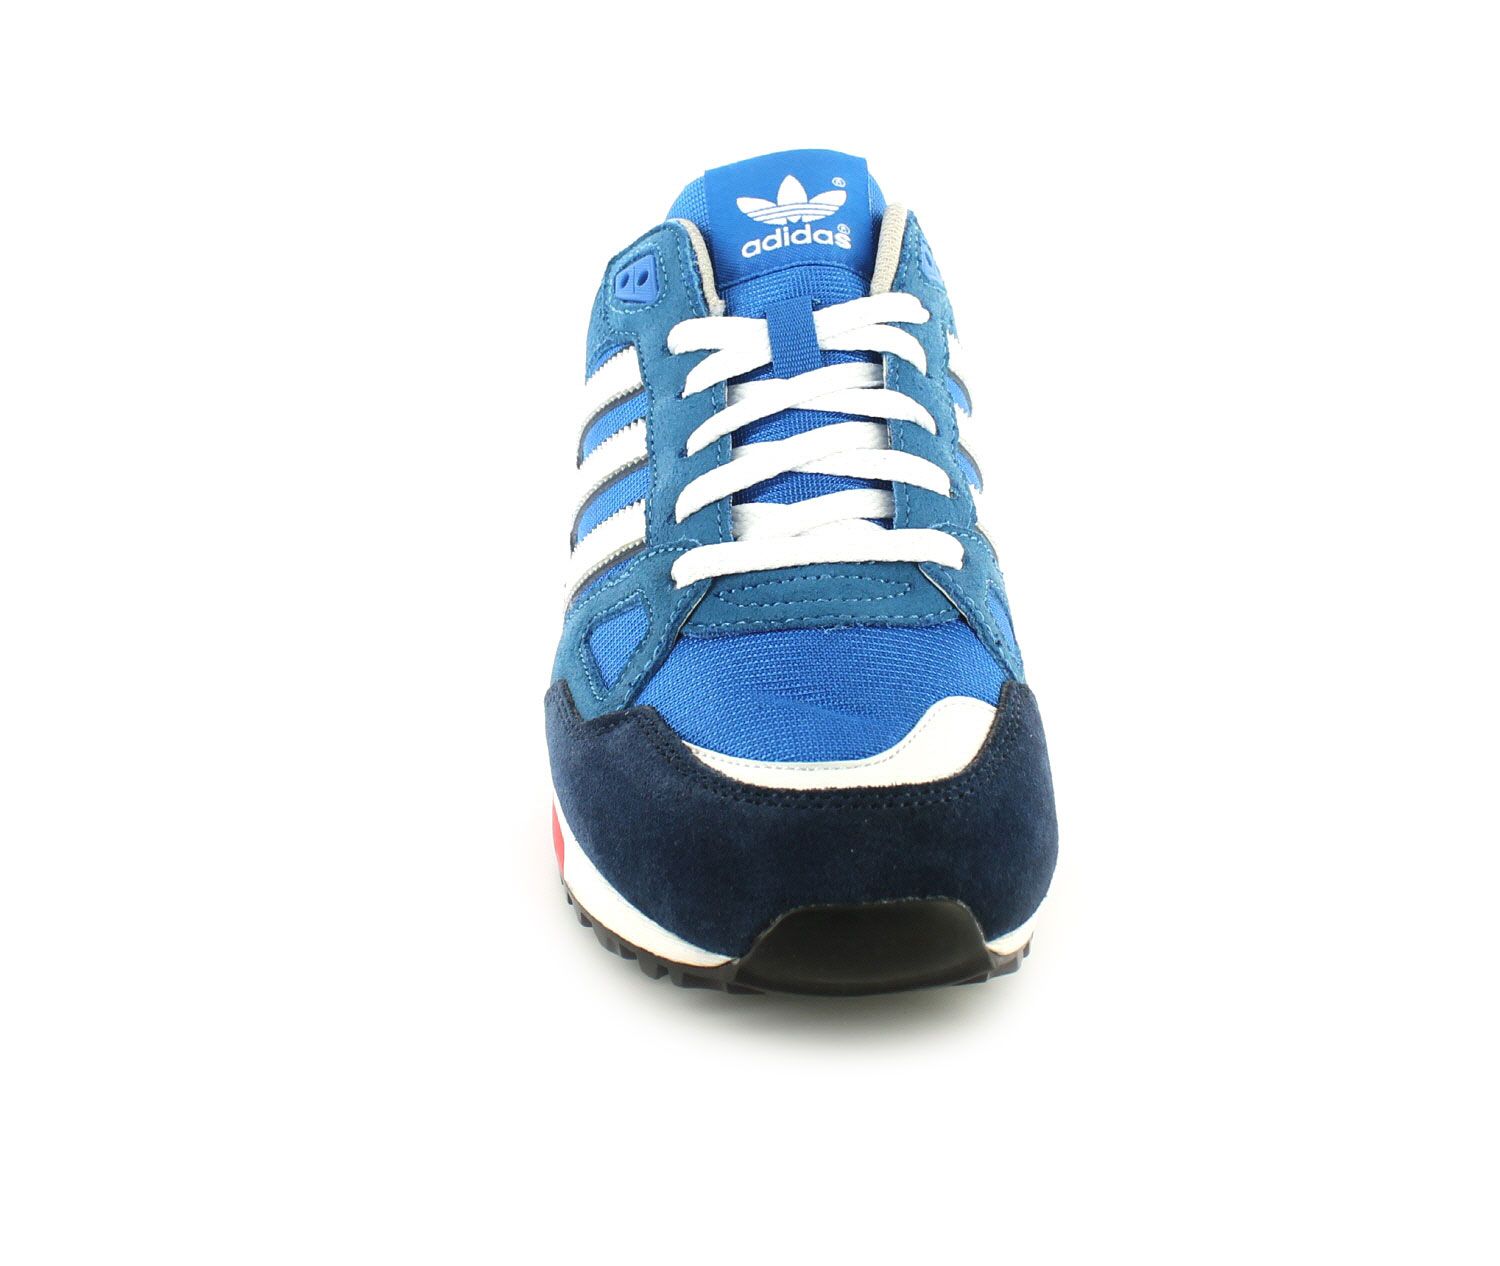 New Mens/Gents Blue/White Adidas Leather Lightweight Running Shoes